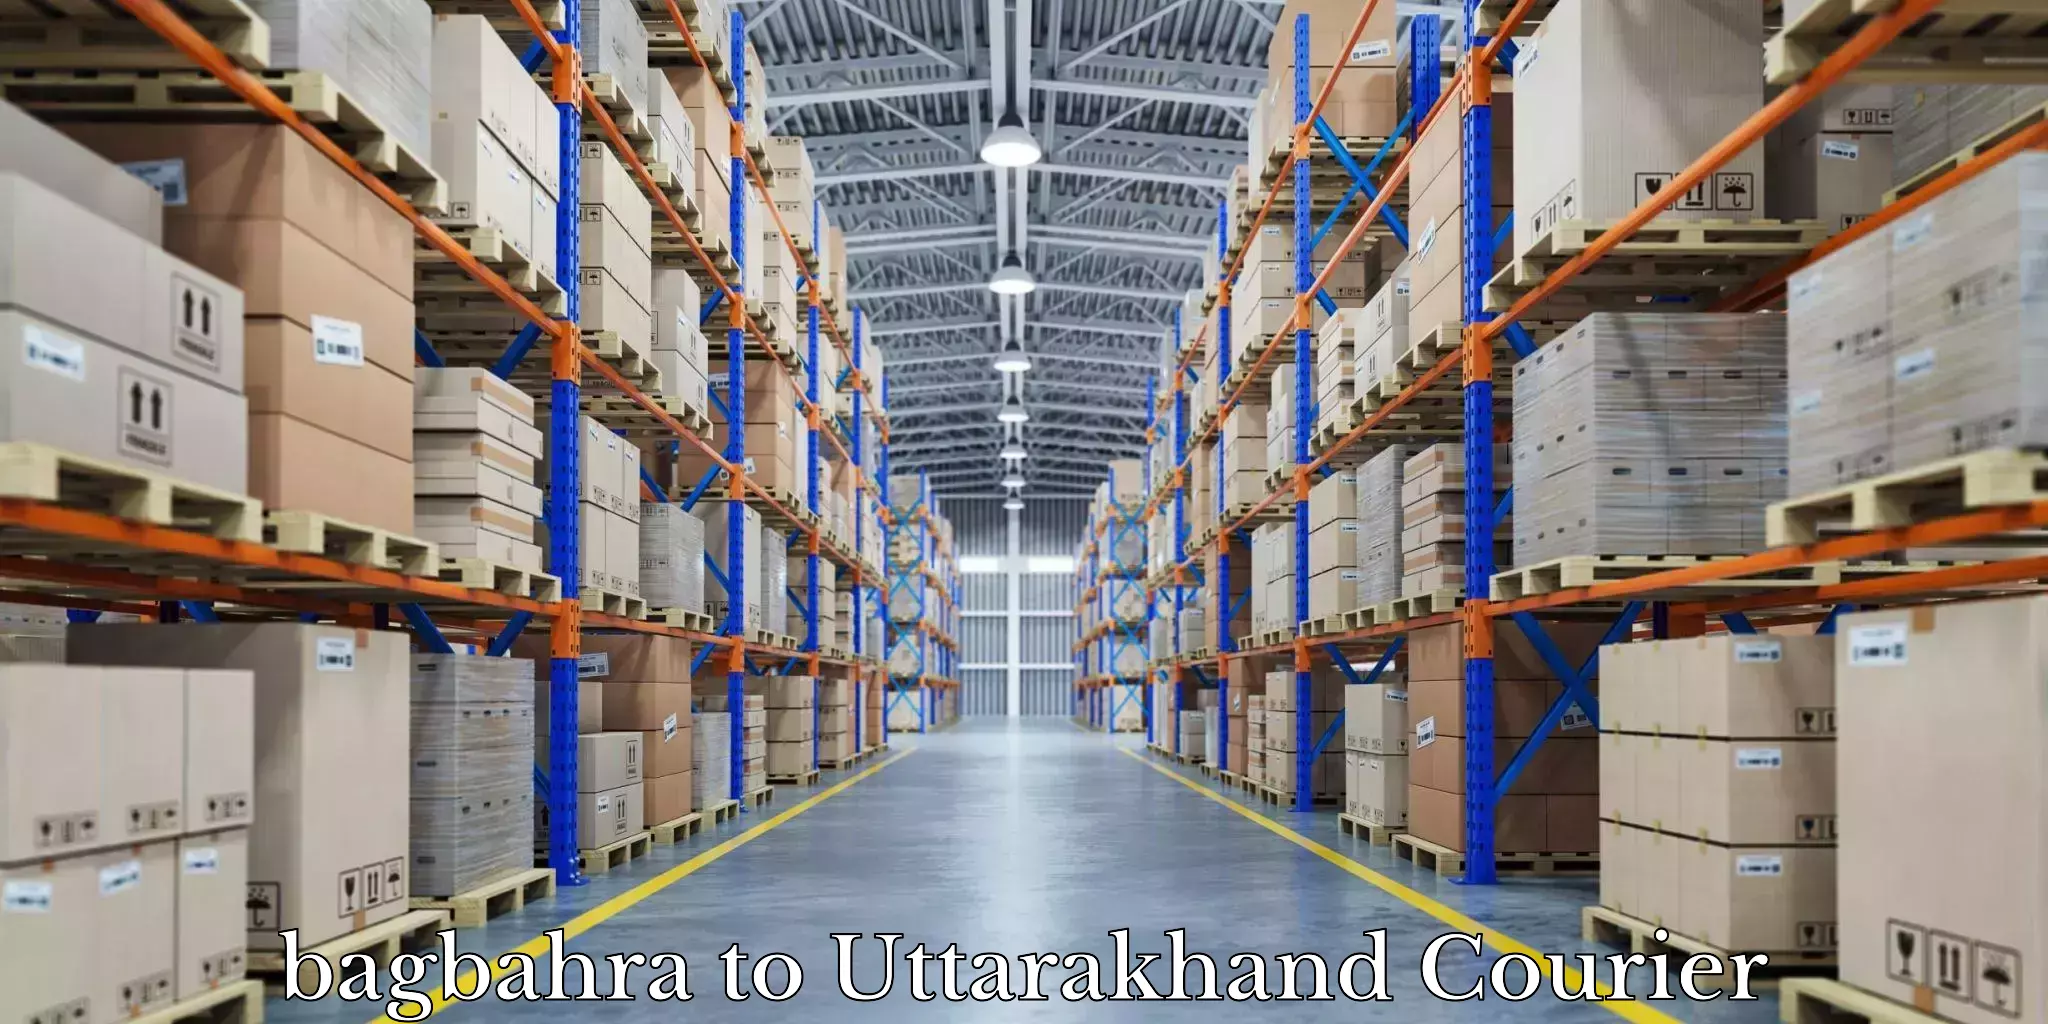 Moving and handling services bagbahra to Uttarakhand